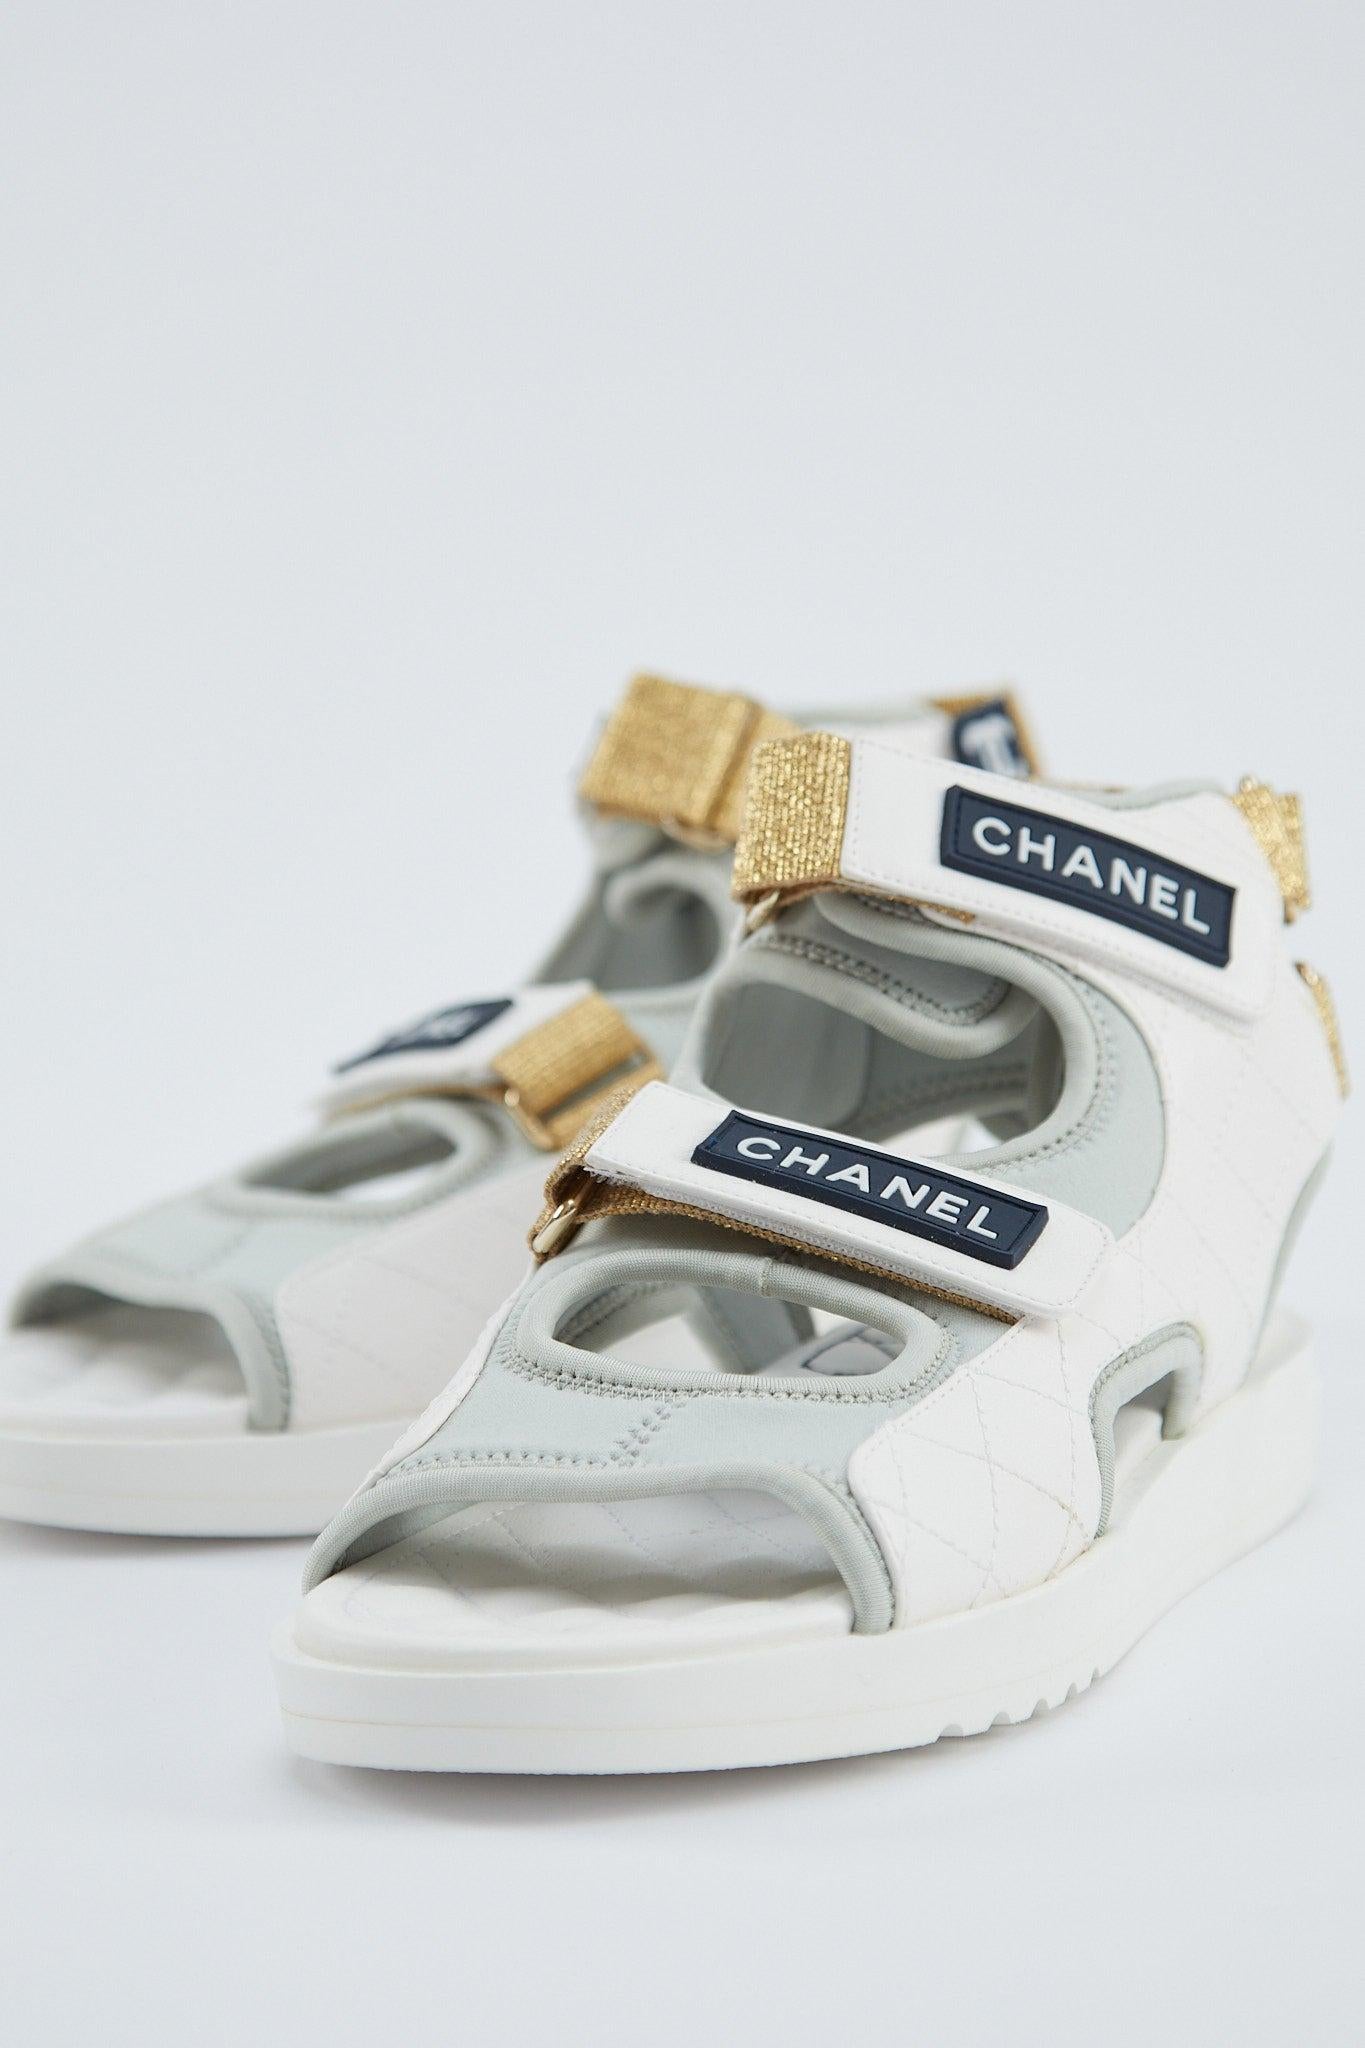 Chanel Gladiator Sandal 

Grey Jersey fabric with white leather trim

Ankle straps, velcro uppers and navy blue Chanel logo

Quilted insole & gold stretch heel detail

Comes with box, no dustbags

Size 38.5